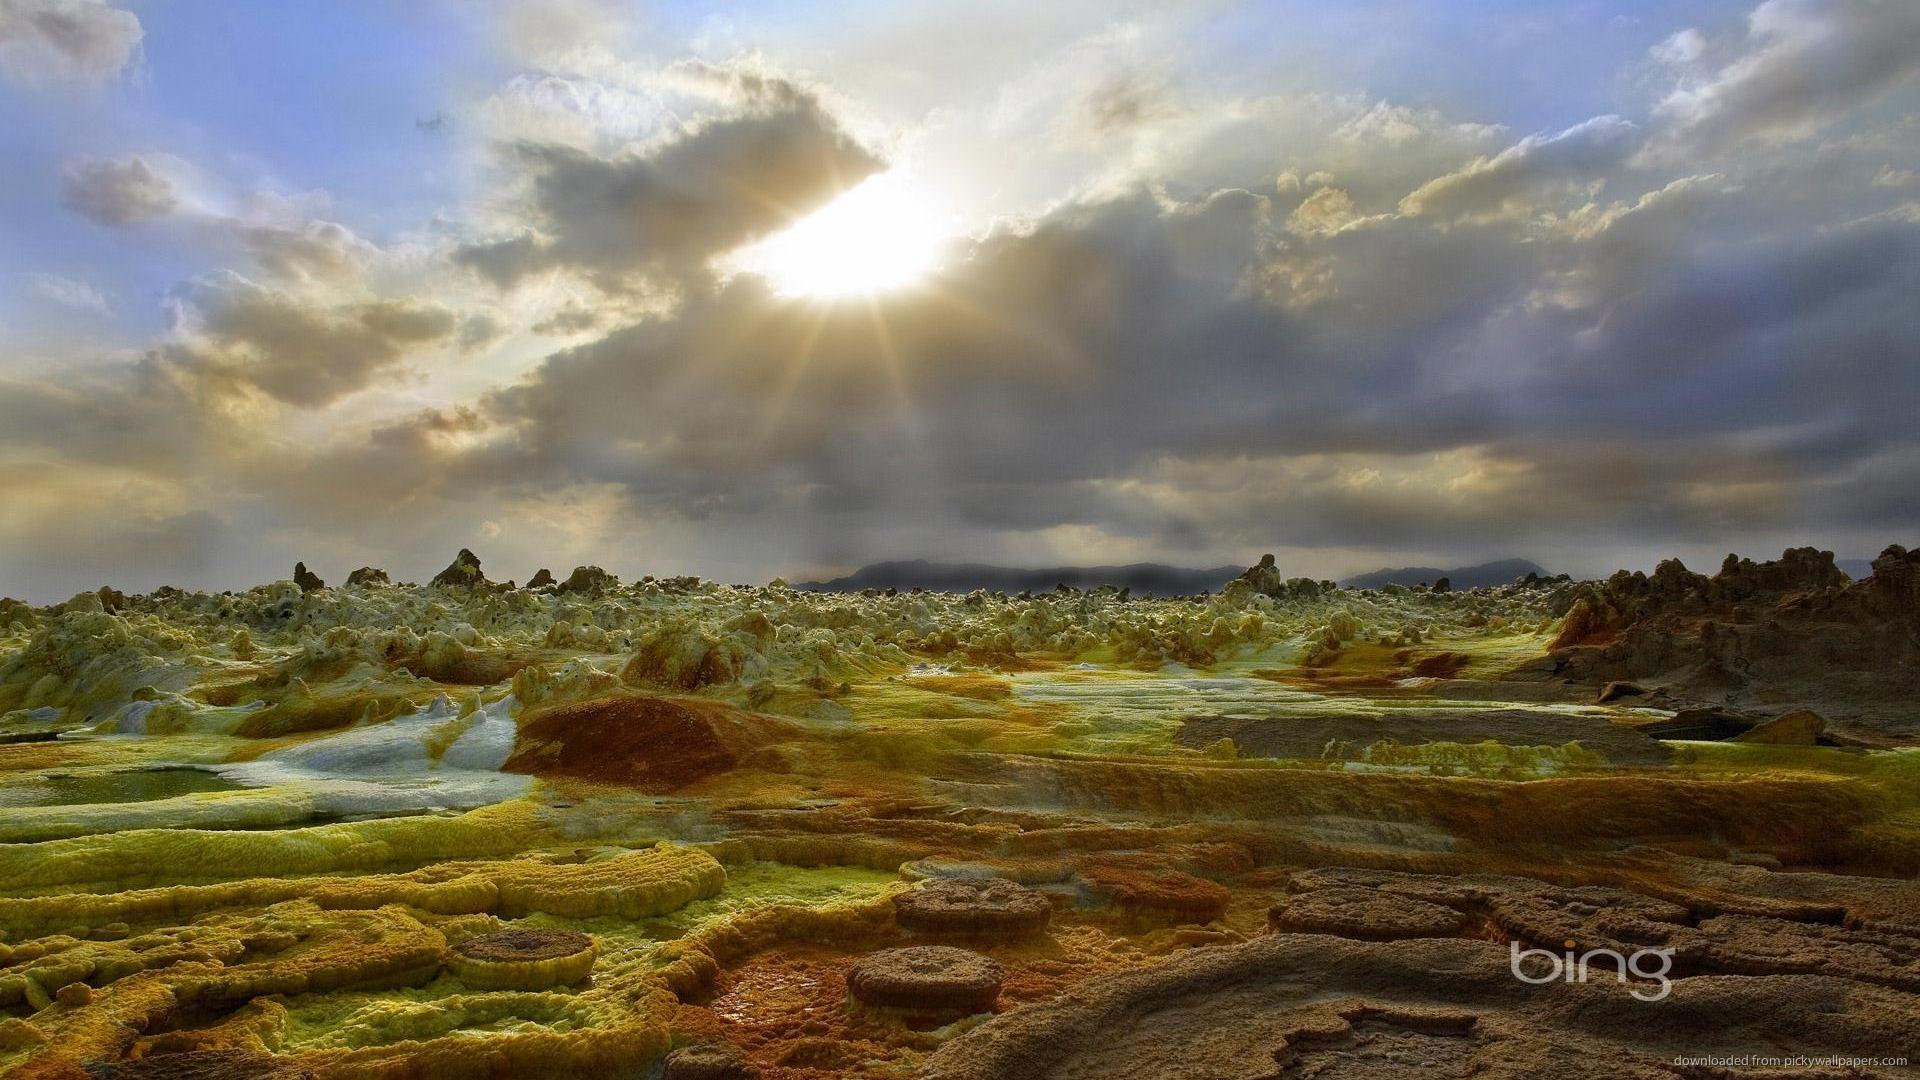 Free Download 1920x1080 Bing Landscape Wallpaper 1920x1080 For Your